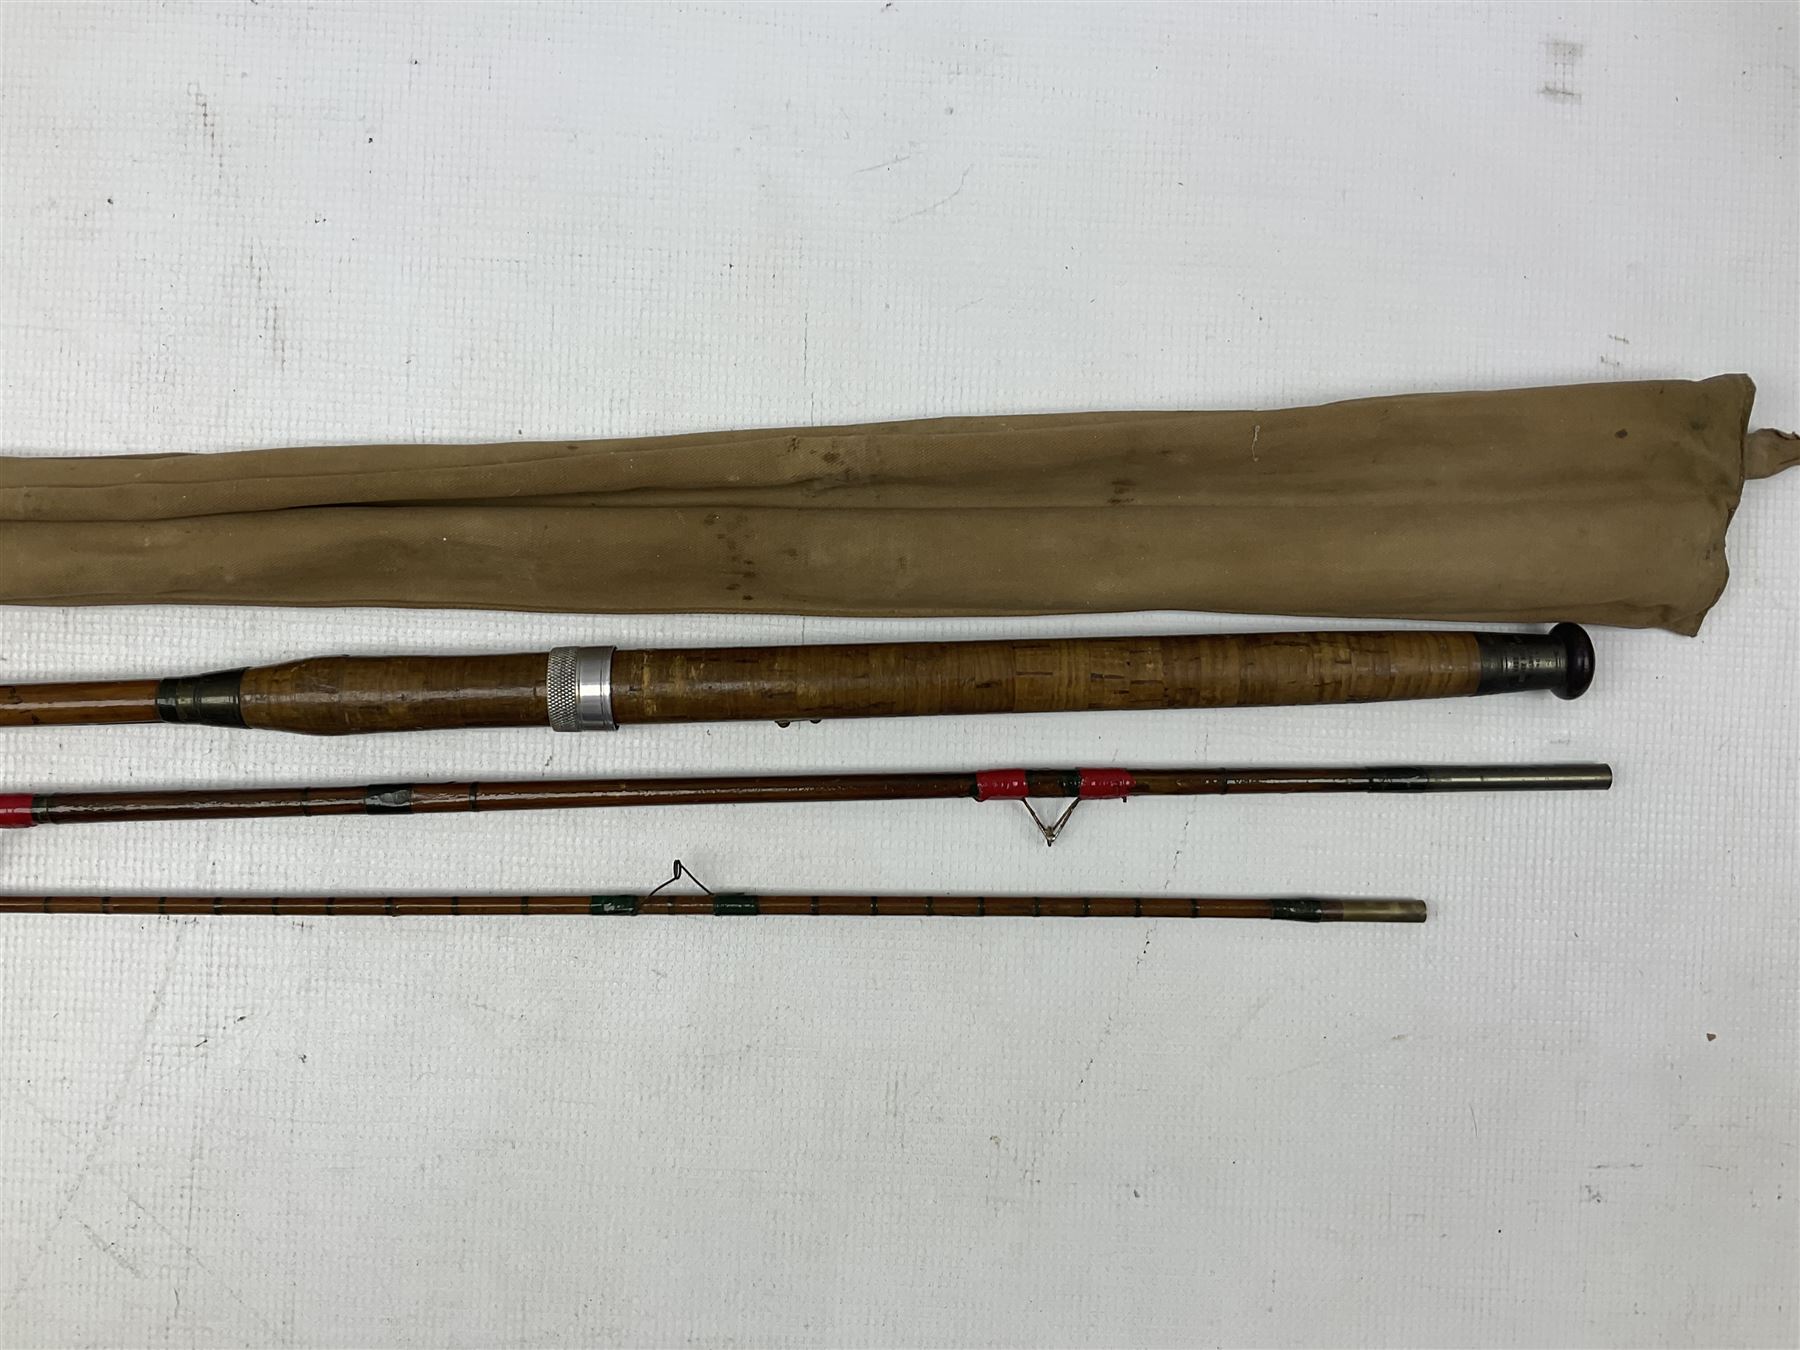 Three piece cane fishing rod 'The no 1 wallis rod' with Hardy Bros fittings - Image 3 of 3